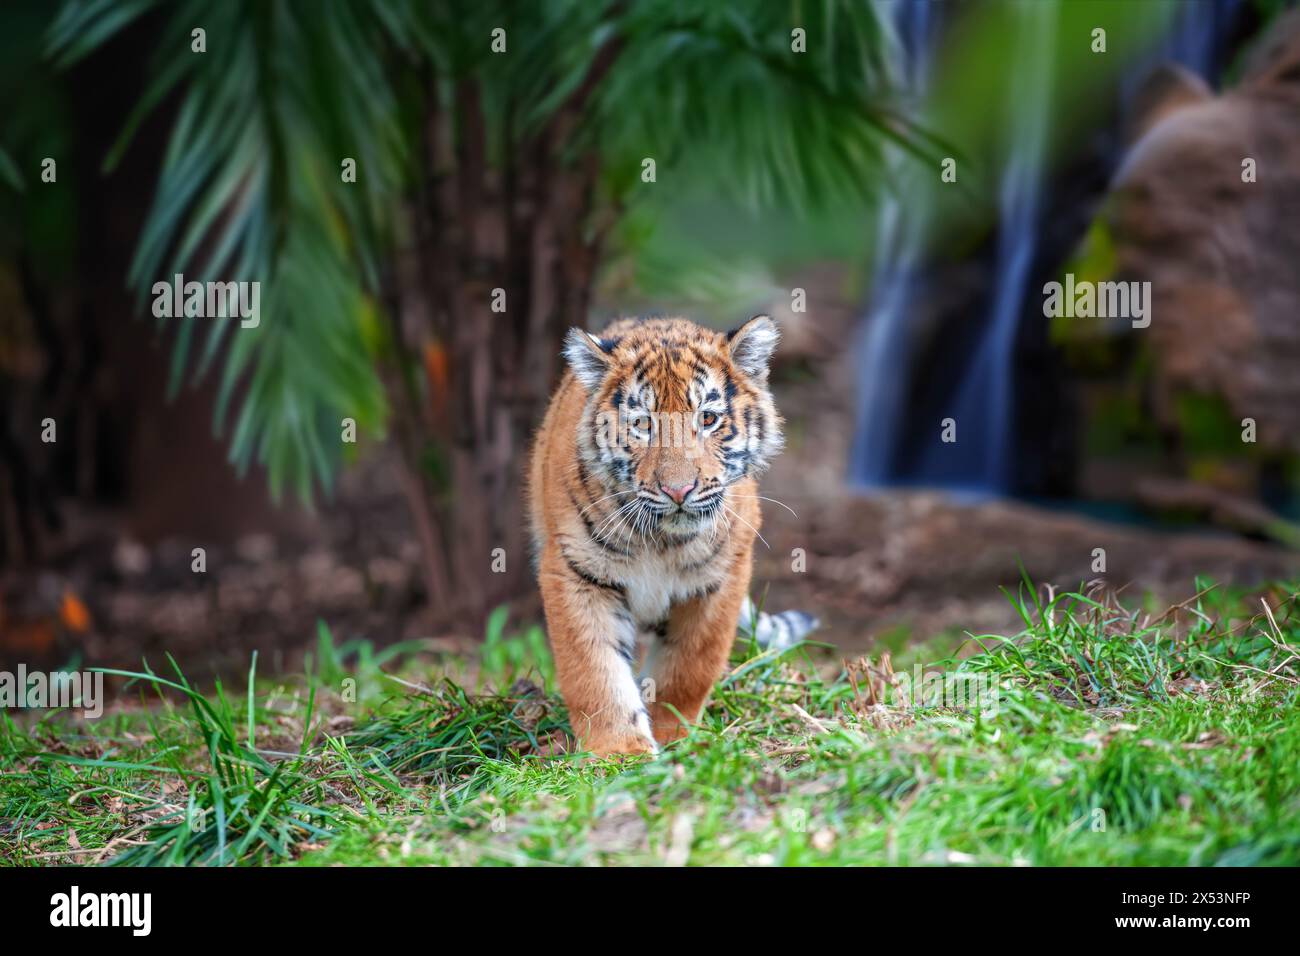 Tiger cub in the wild. Baby animal in green grass on waterfall background. Wild cat in nature habitat Stock Photo